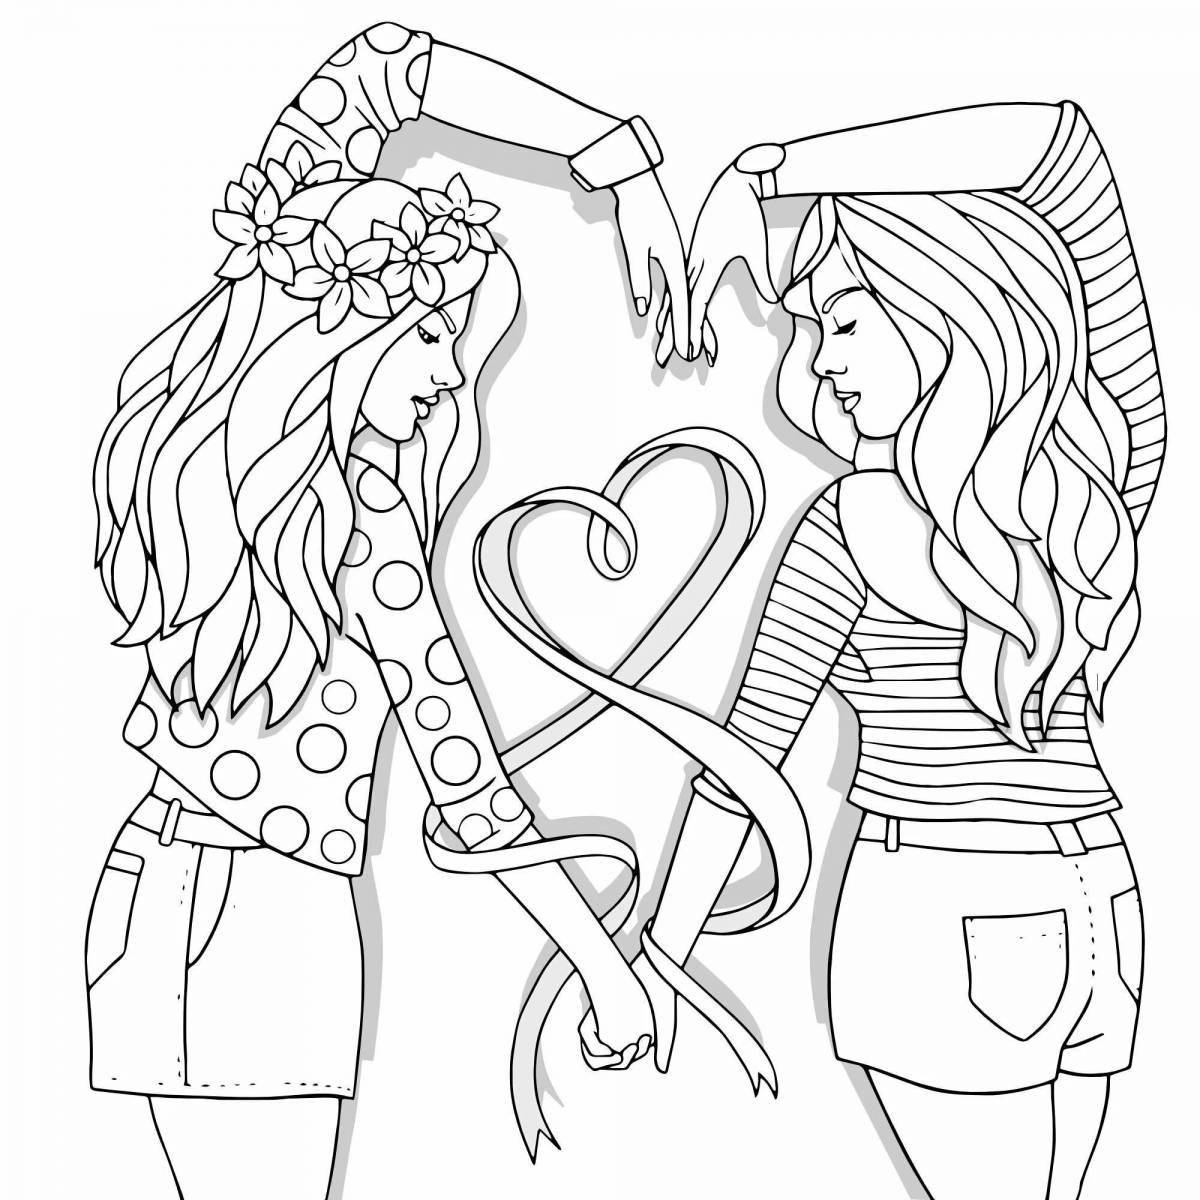 Coloring book magical sam and sue